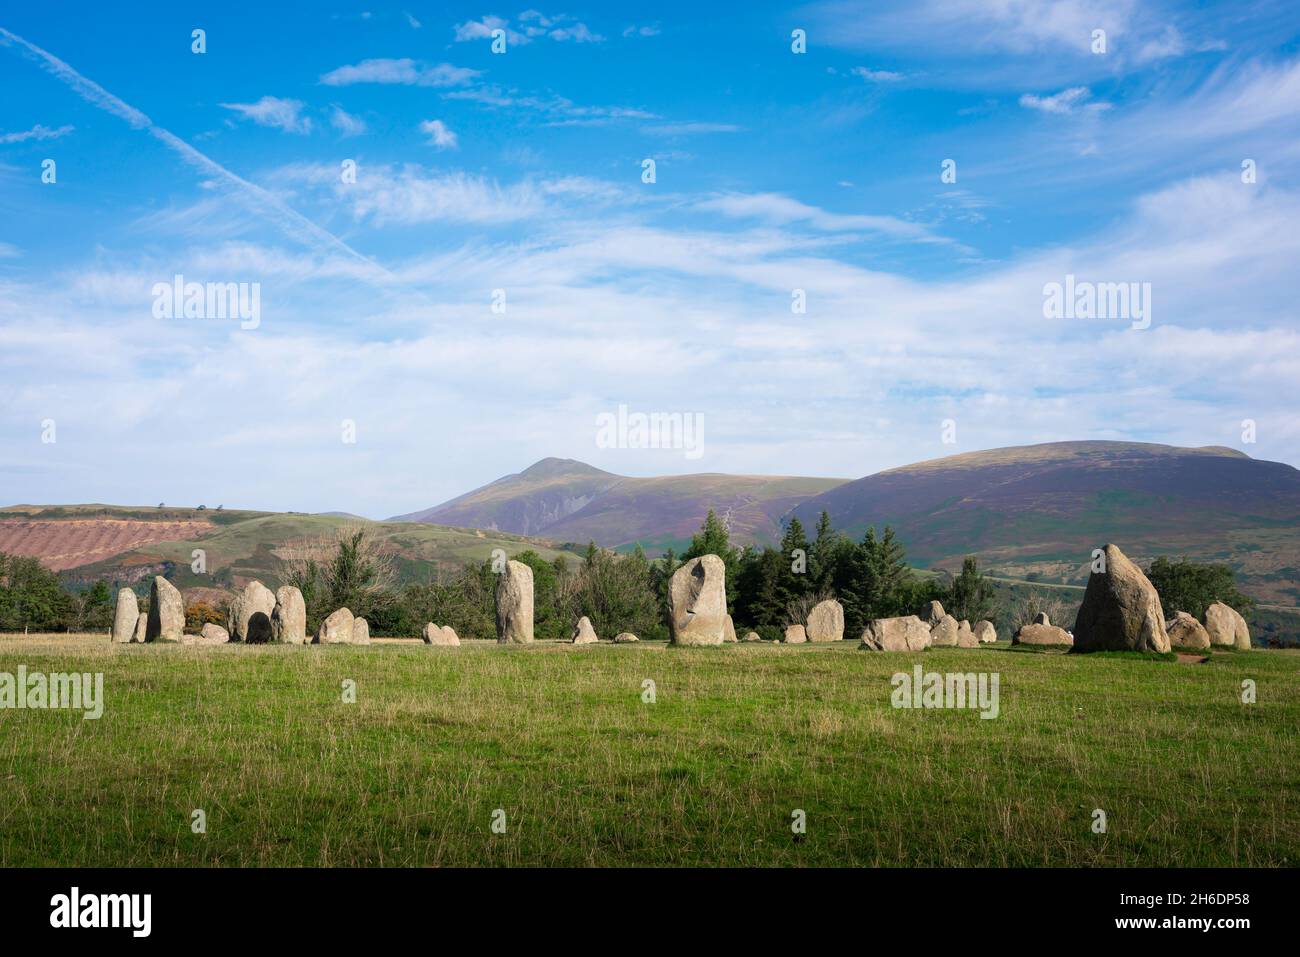 Ancient stone, view in summer of the Castlerigg Stone Circle, an ancient British monument composed of standing stones dated to 3000BC, Cumbria,England Stock Photo